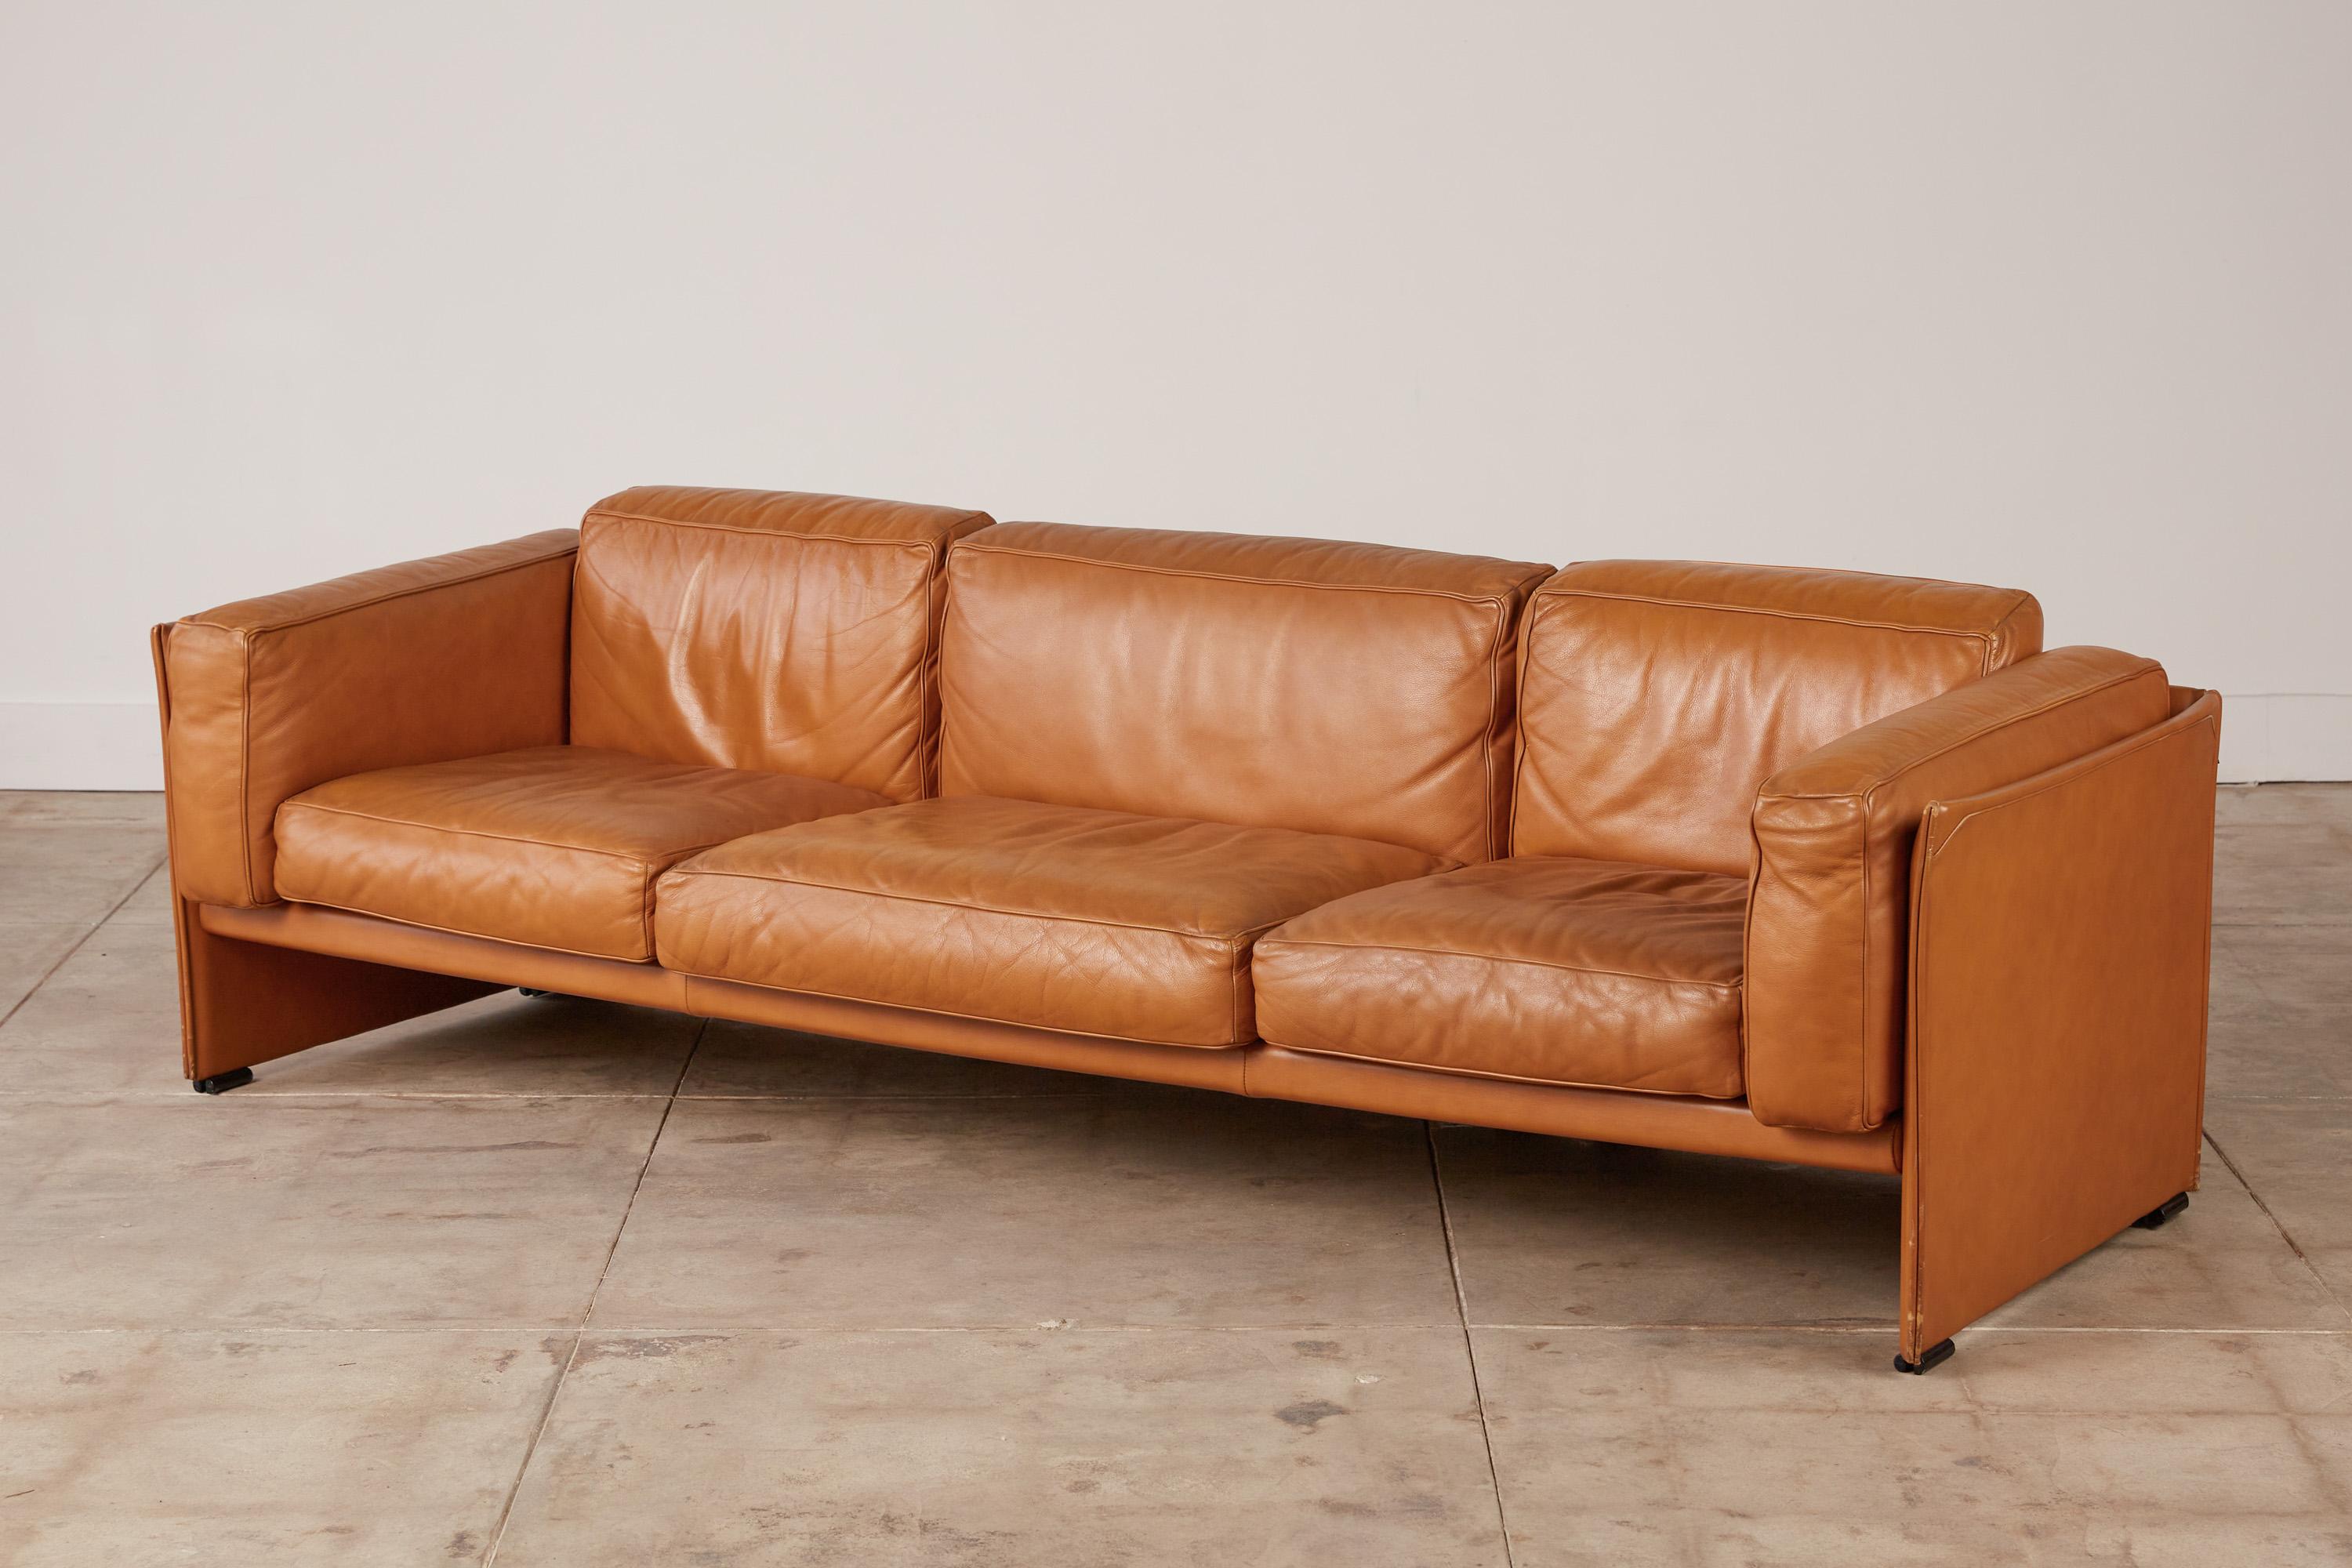 405 Duc' three-seat sofa by Mario Bellini for Cassina, Italy, c.1970s. Leather-wrapped panels attached by zippers that is a classic Bellini design element to create the base structure for this piece with thick loose box cushions inside the frame